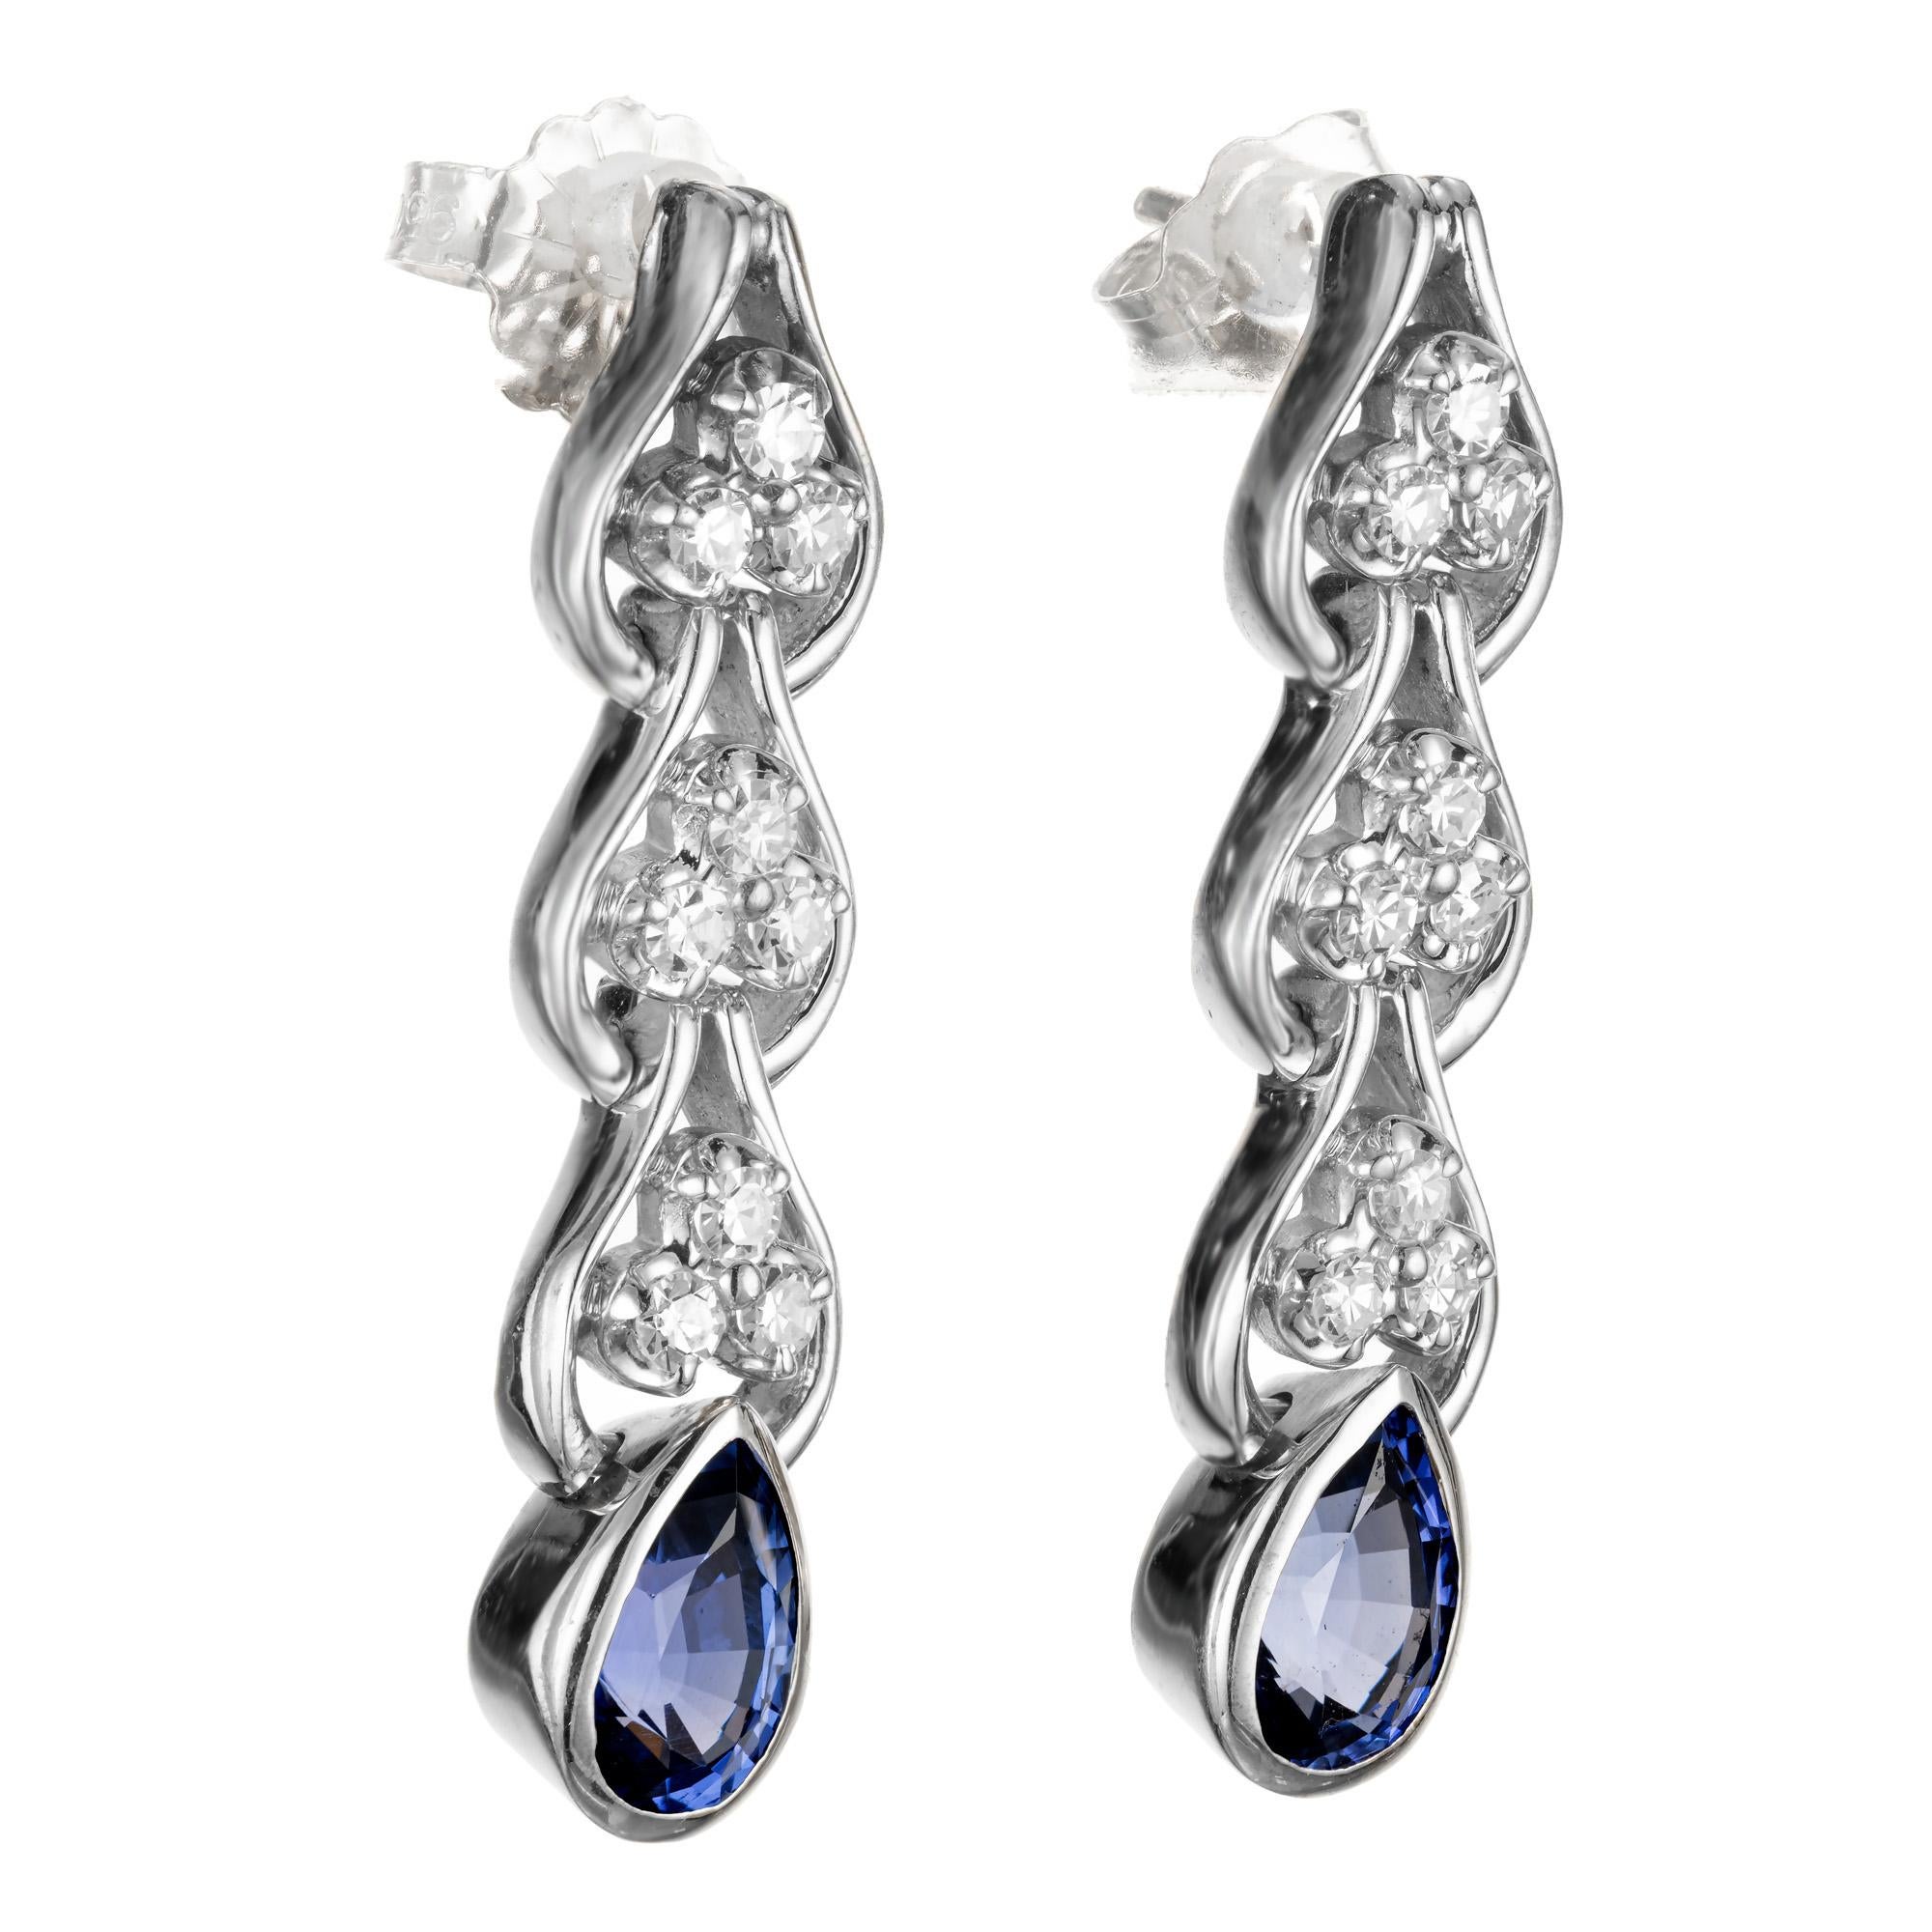 1960's Diamond and Sapphire dangle drop earrings. 9 round cut diamonds with a pear shaped bezel set sapphire at the bottom of each earring.  GIA certified. 

2 natural no heat pear shaped blue Sapphires, .77ct and .83ct. GIA certificate numbers: